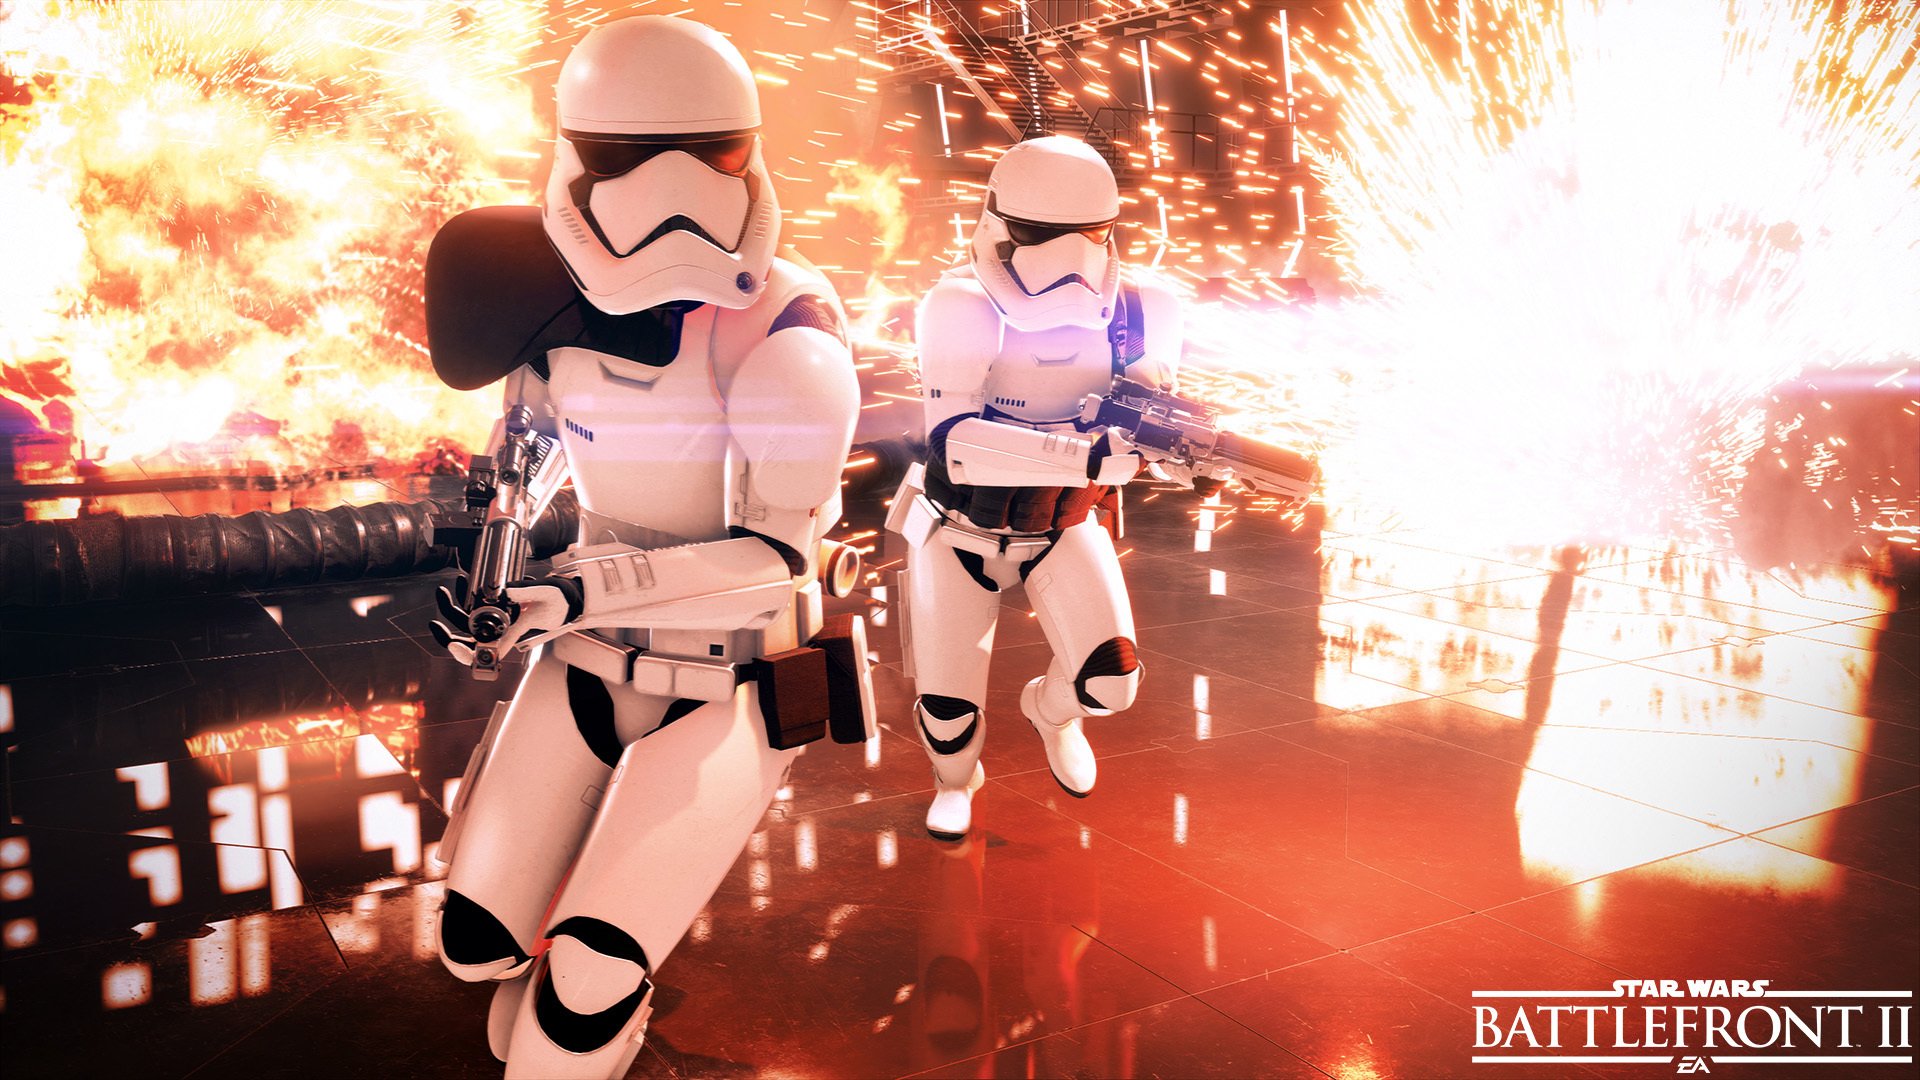 Star Wars Battlefront II Xbox One Game Review